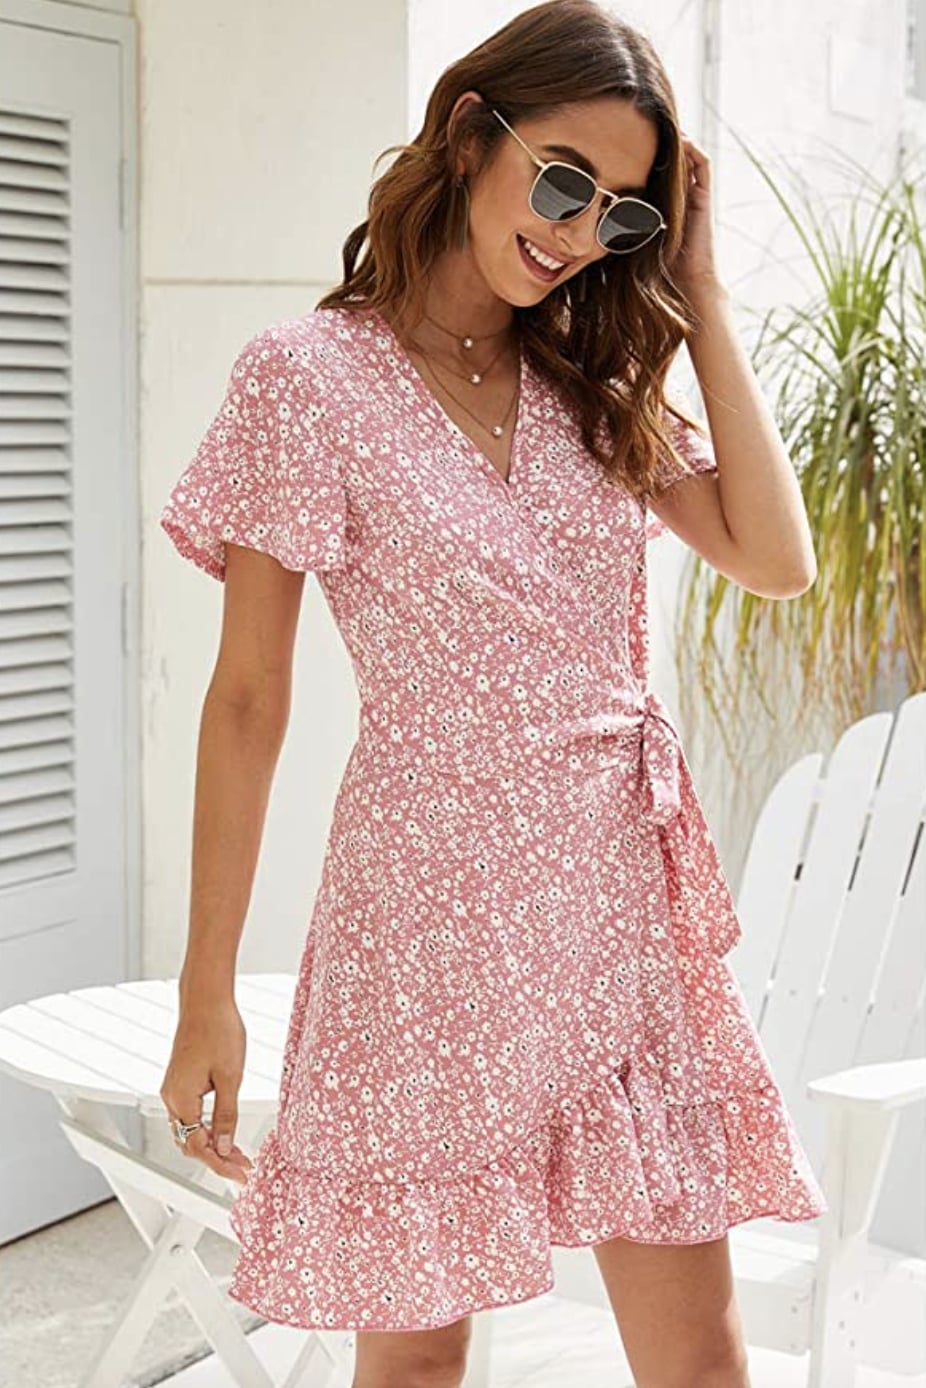 Floerns Floral Spring Dress Is Truly a Boho-Chic Beauty